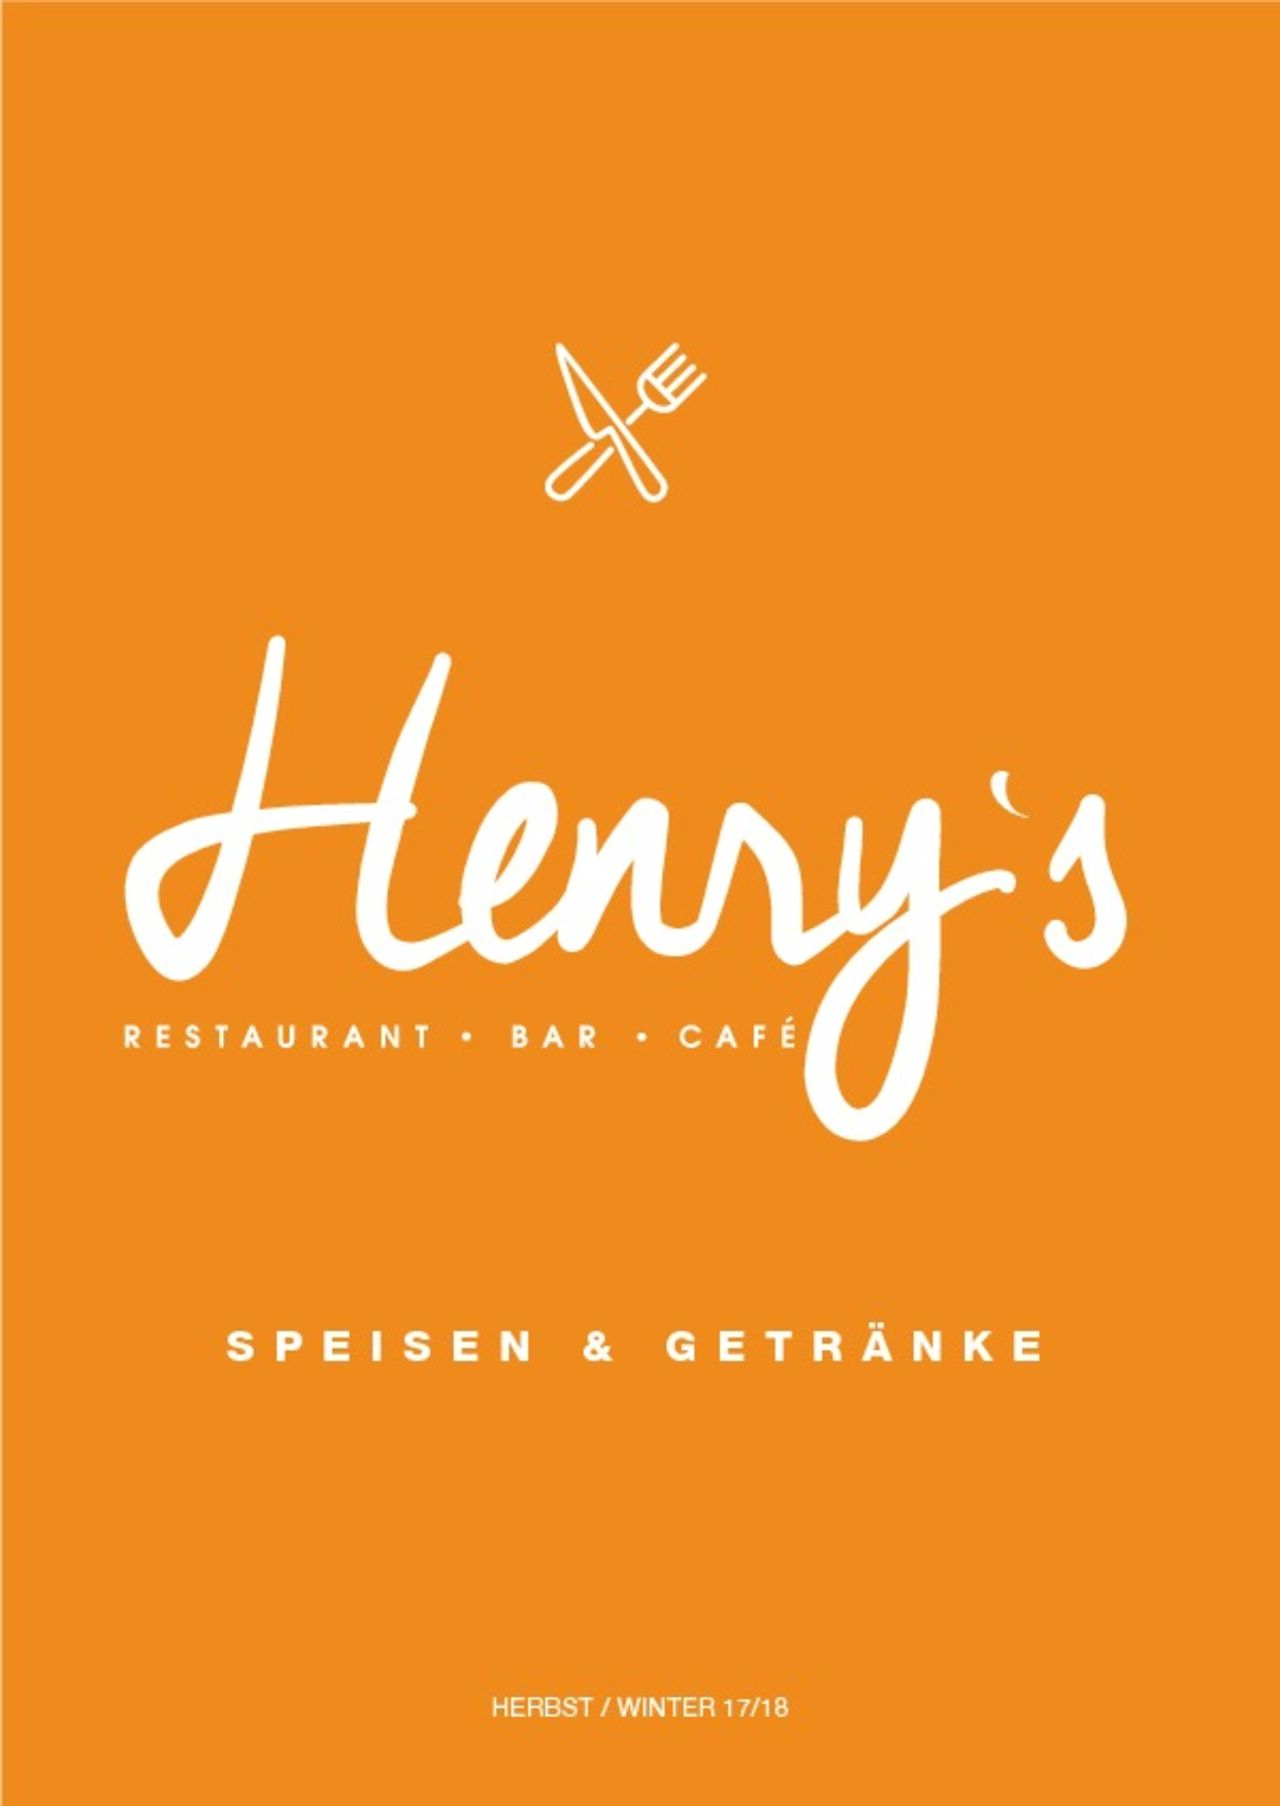 A photo of Henry's